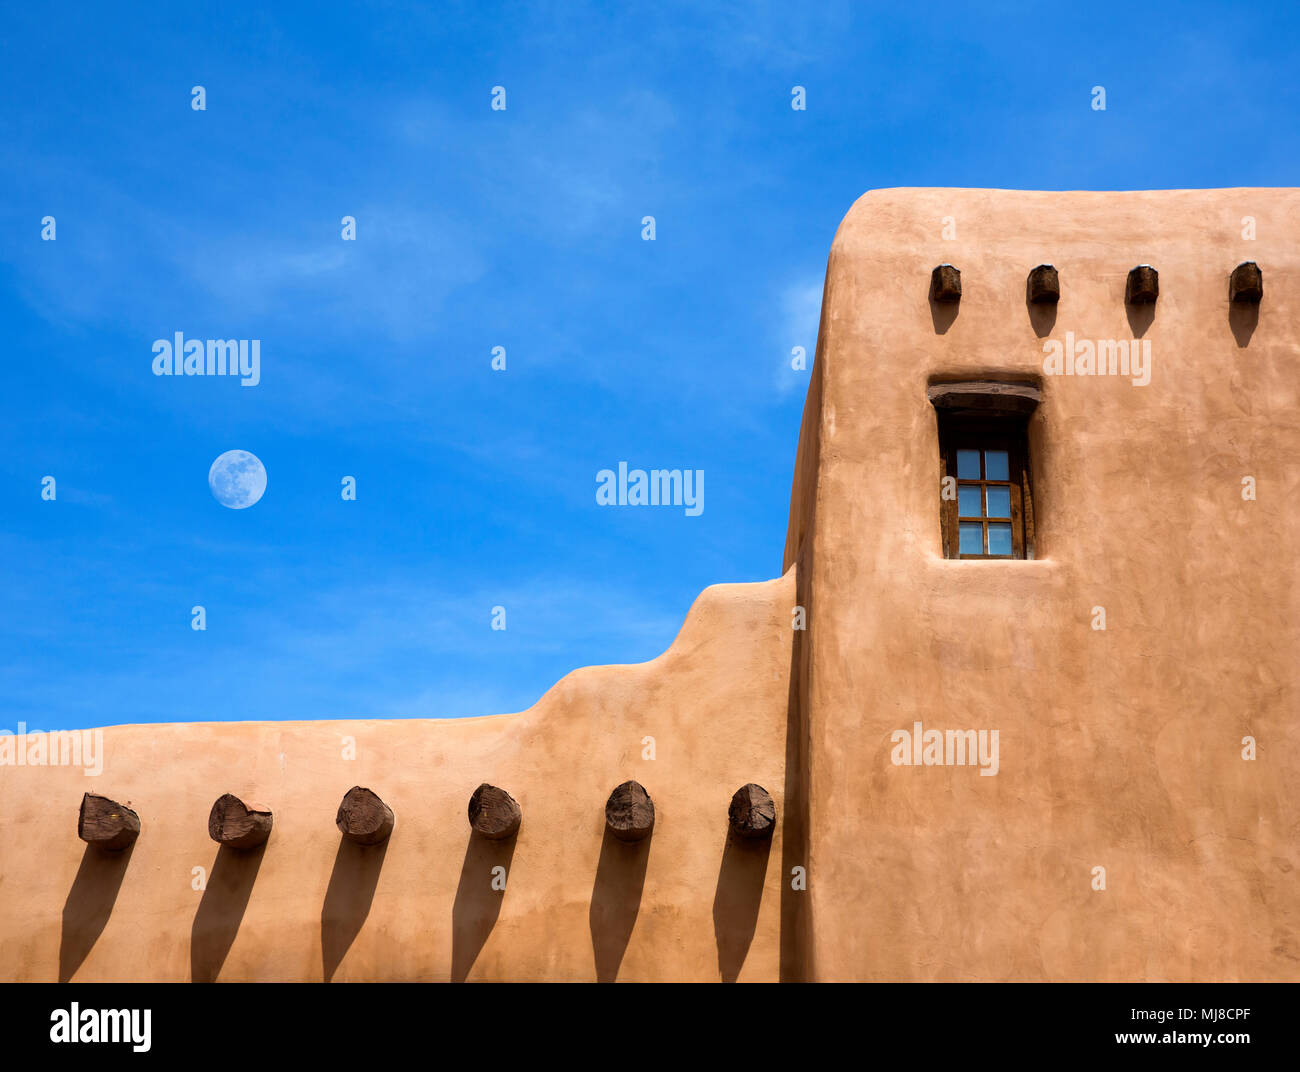 Detail of wall of traditional African mud dwelling, with window and protruding beams. Stock Photo